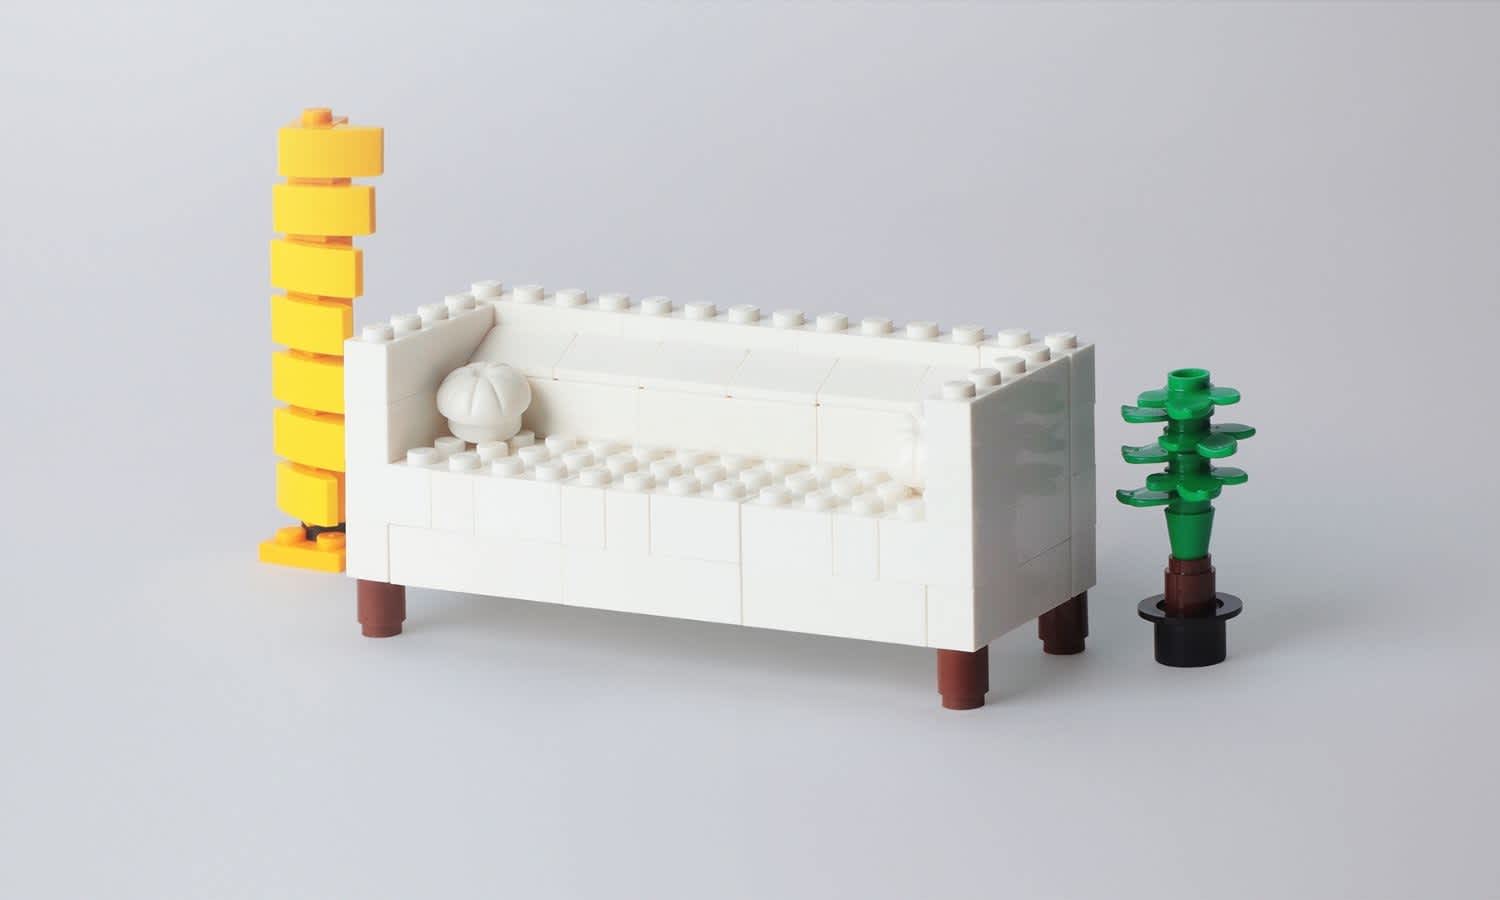 IKEA x LEGO Collab Proves They Are One and the Same